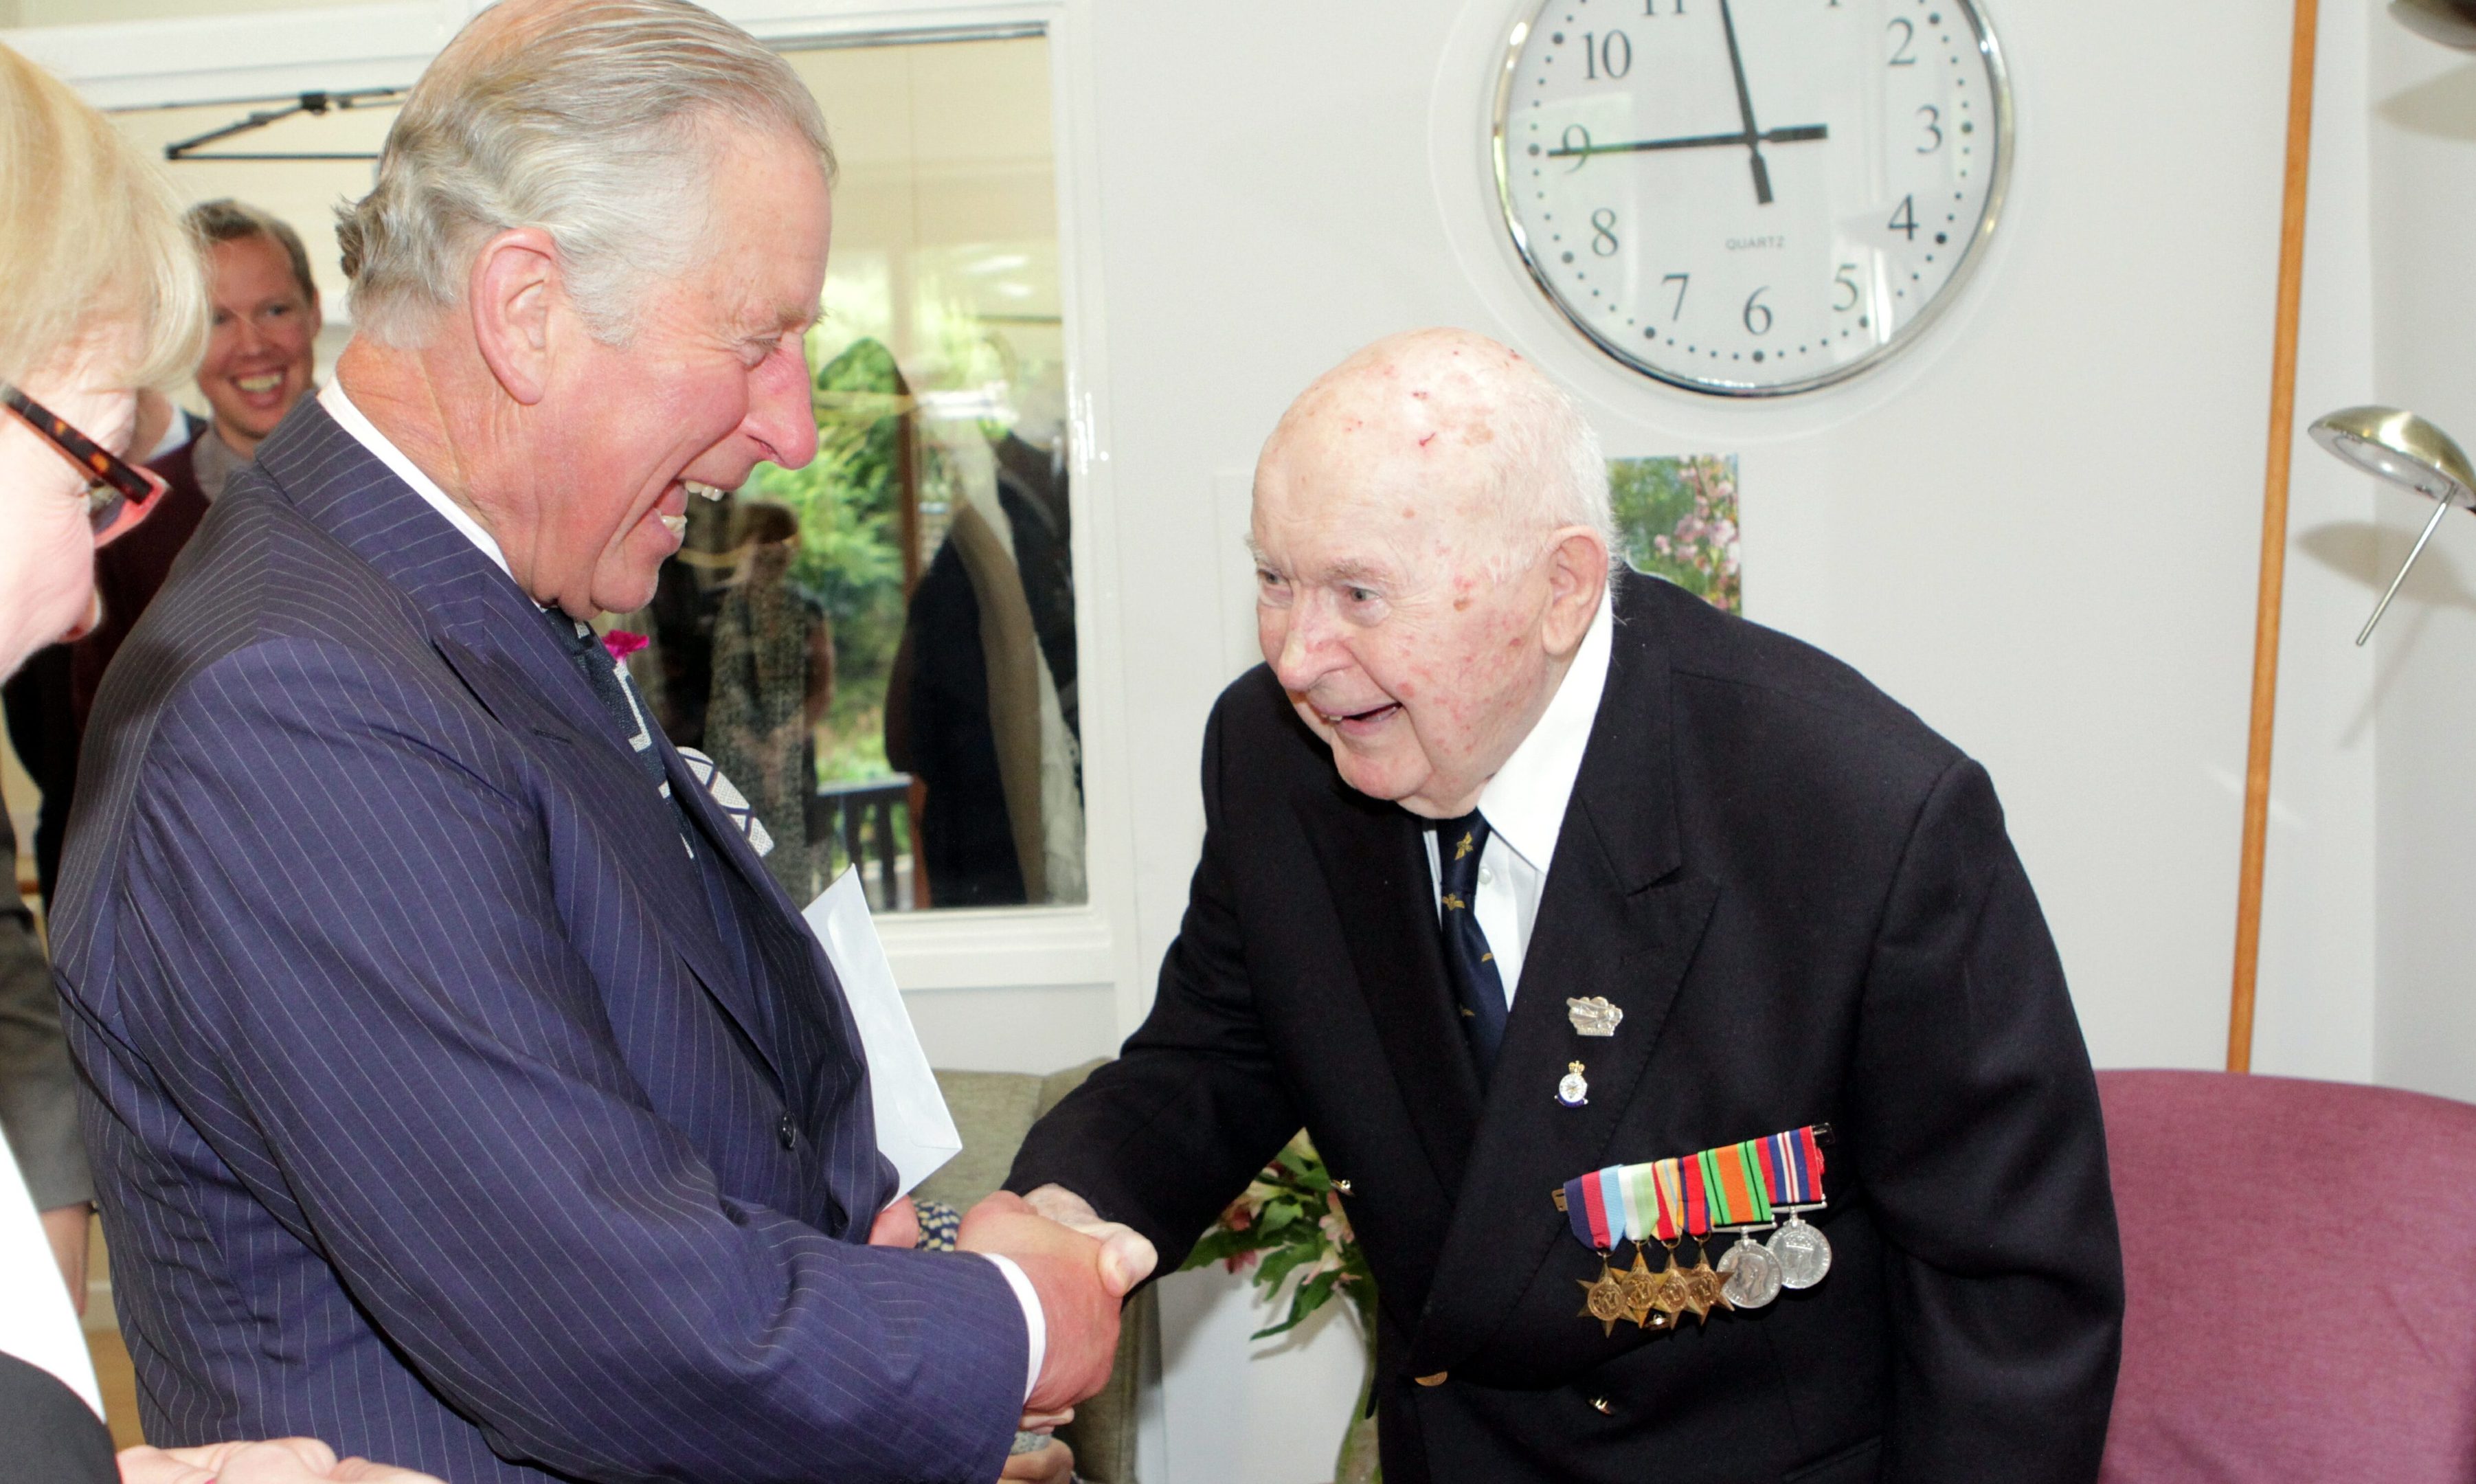 Princes Charles was greeted by Perth pilot John Moffat on his visit to Viewlands House.